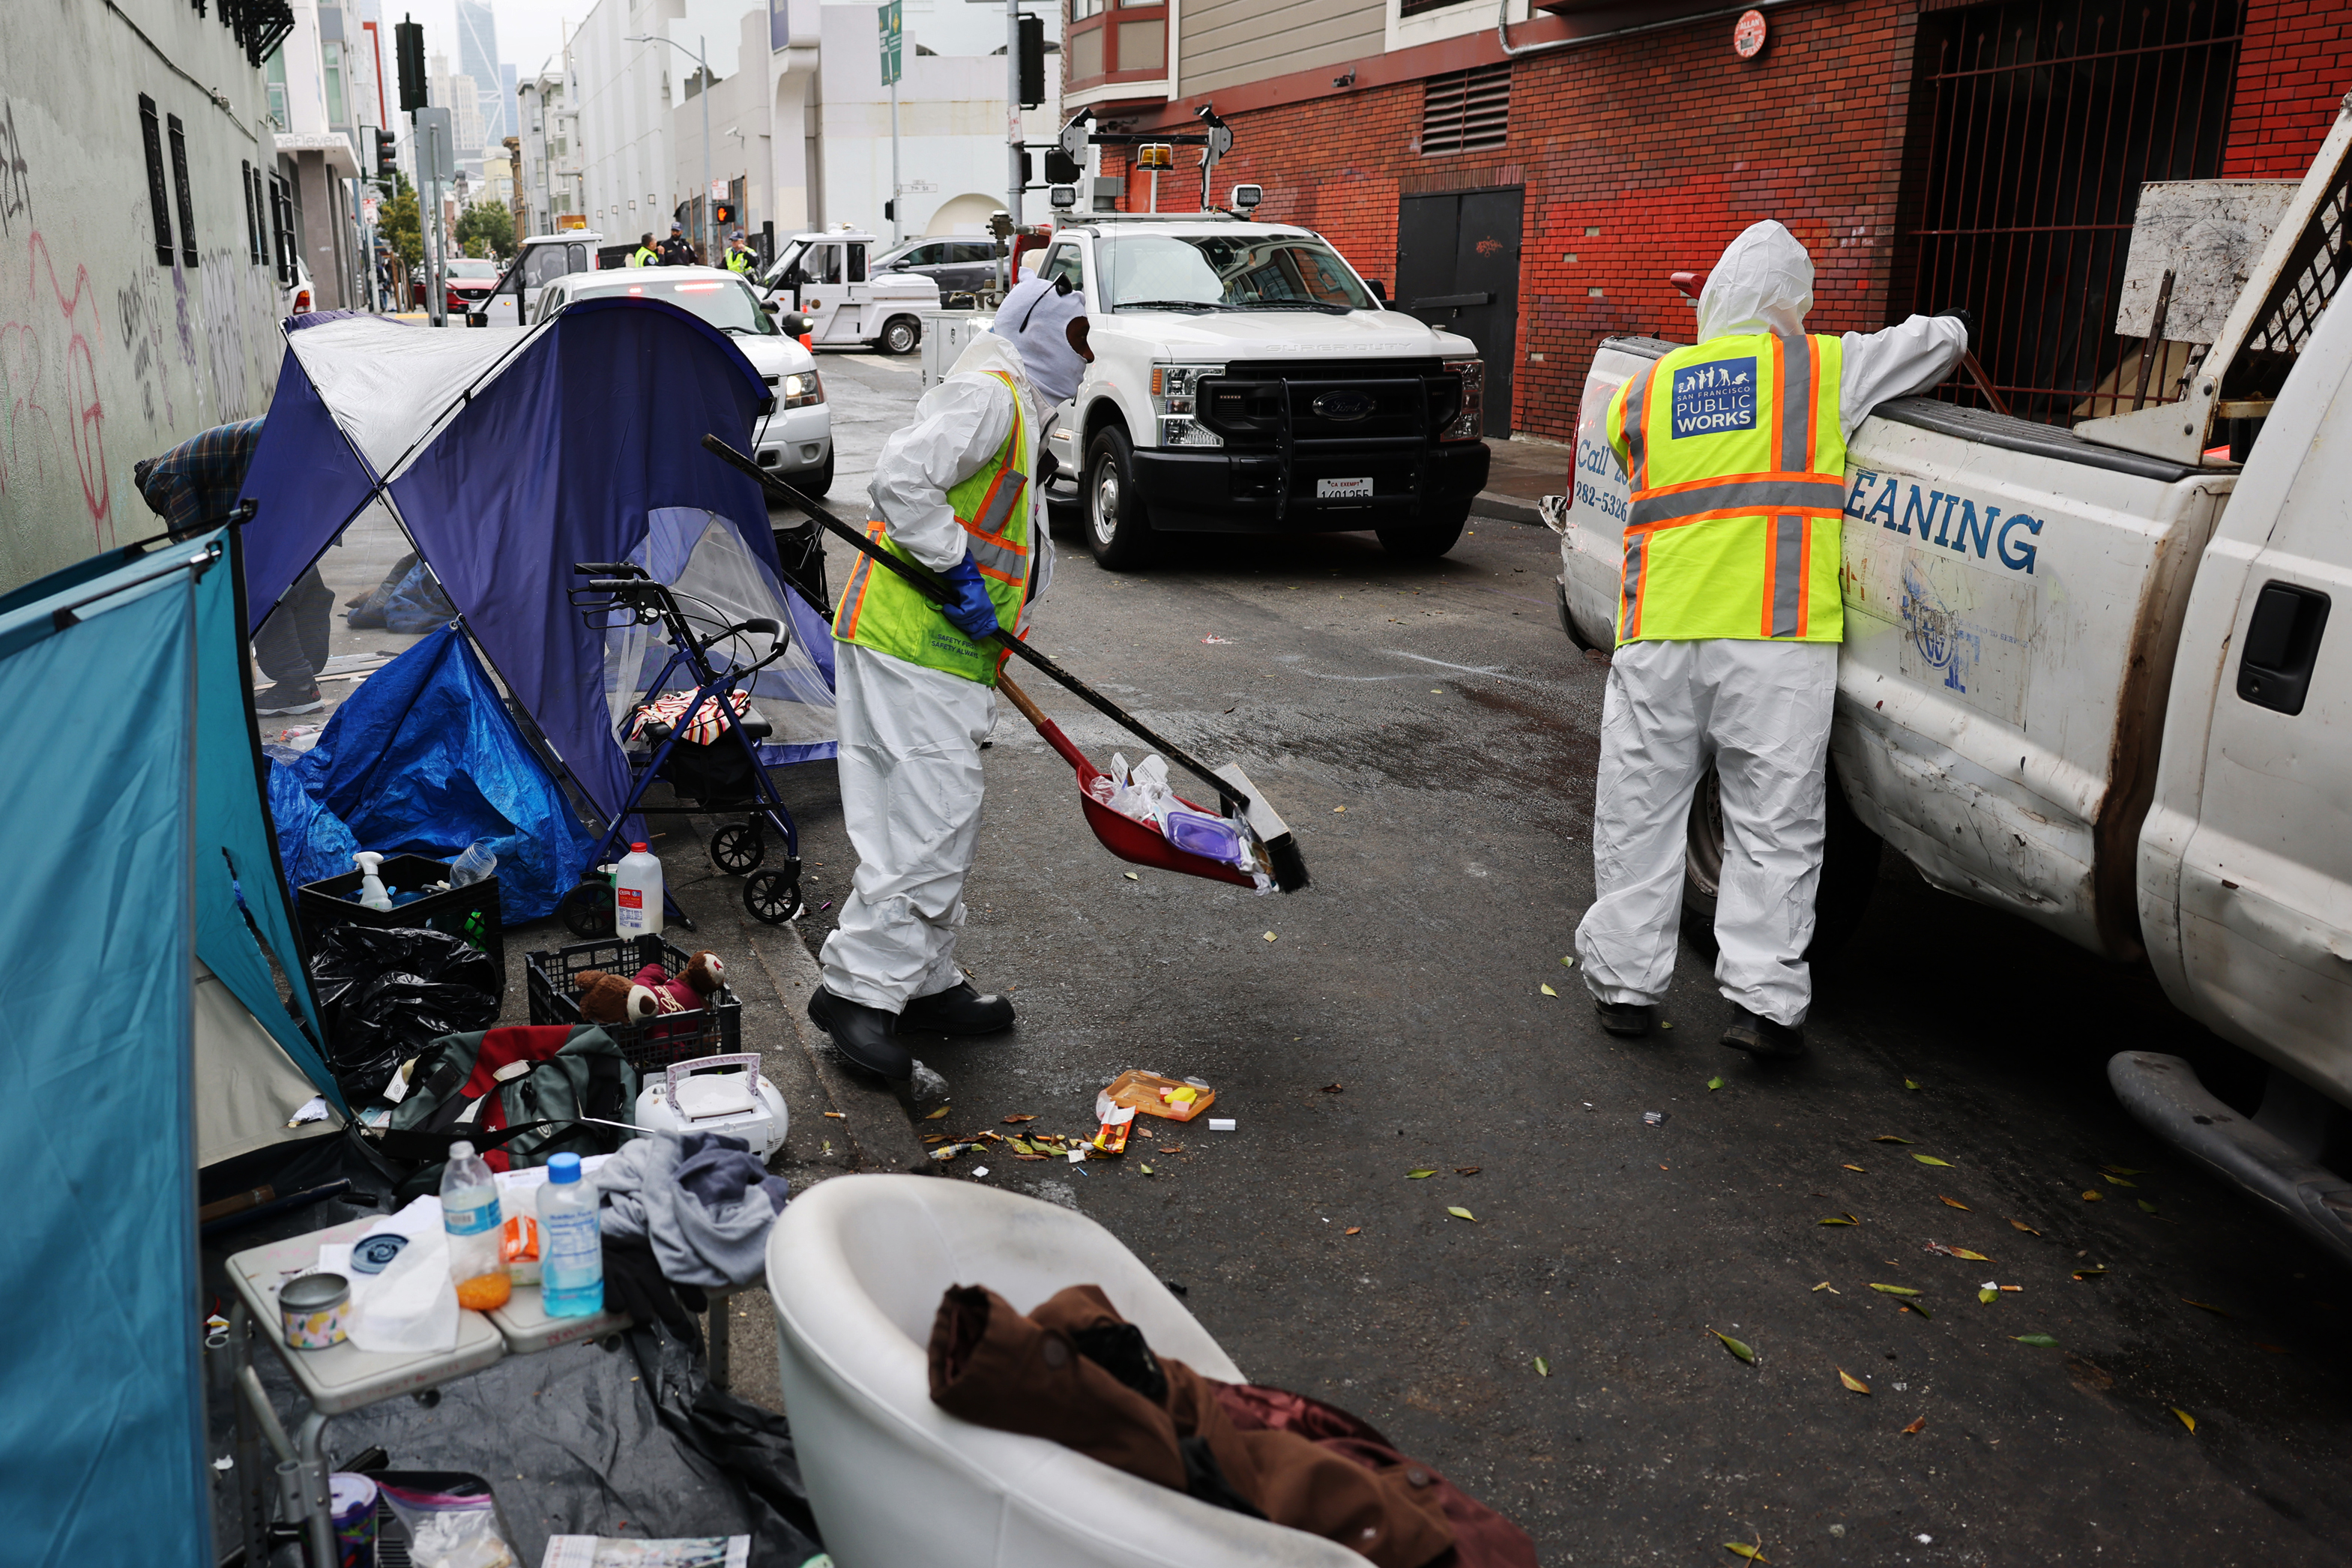 Two workers in hazmat suits and neon vests clean up a cluttered street near a tent. They load trash into a truck as various discarded items are scattered around.